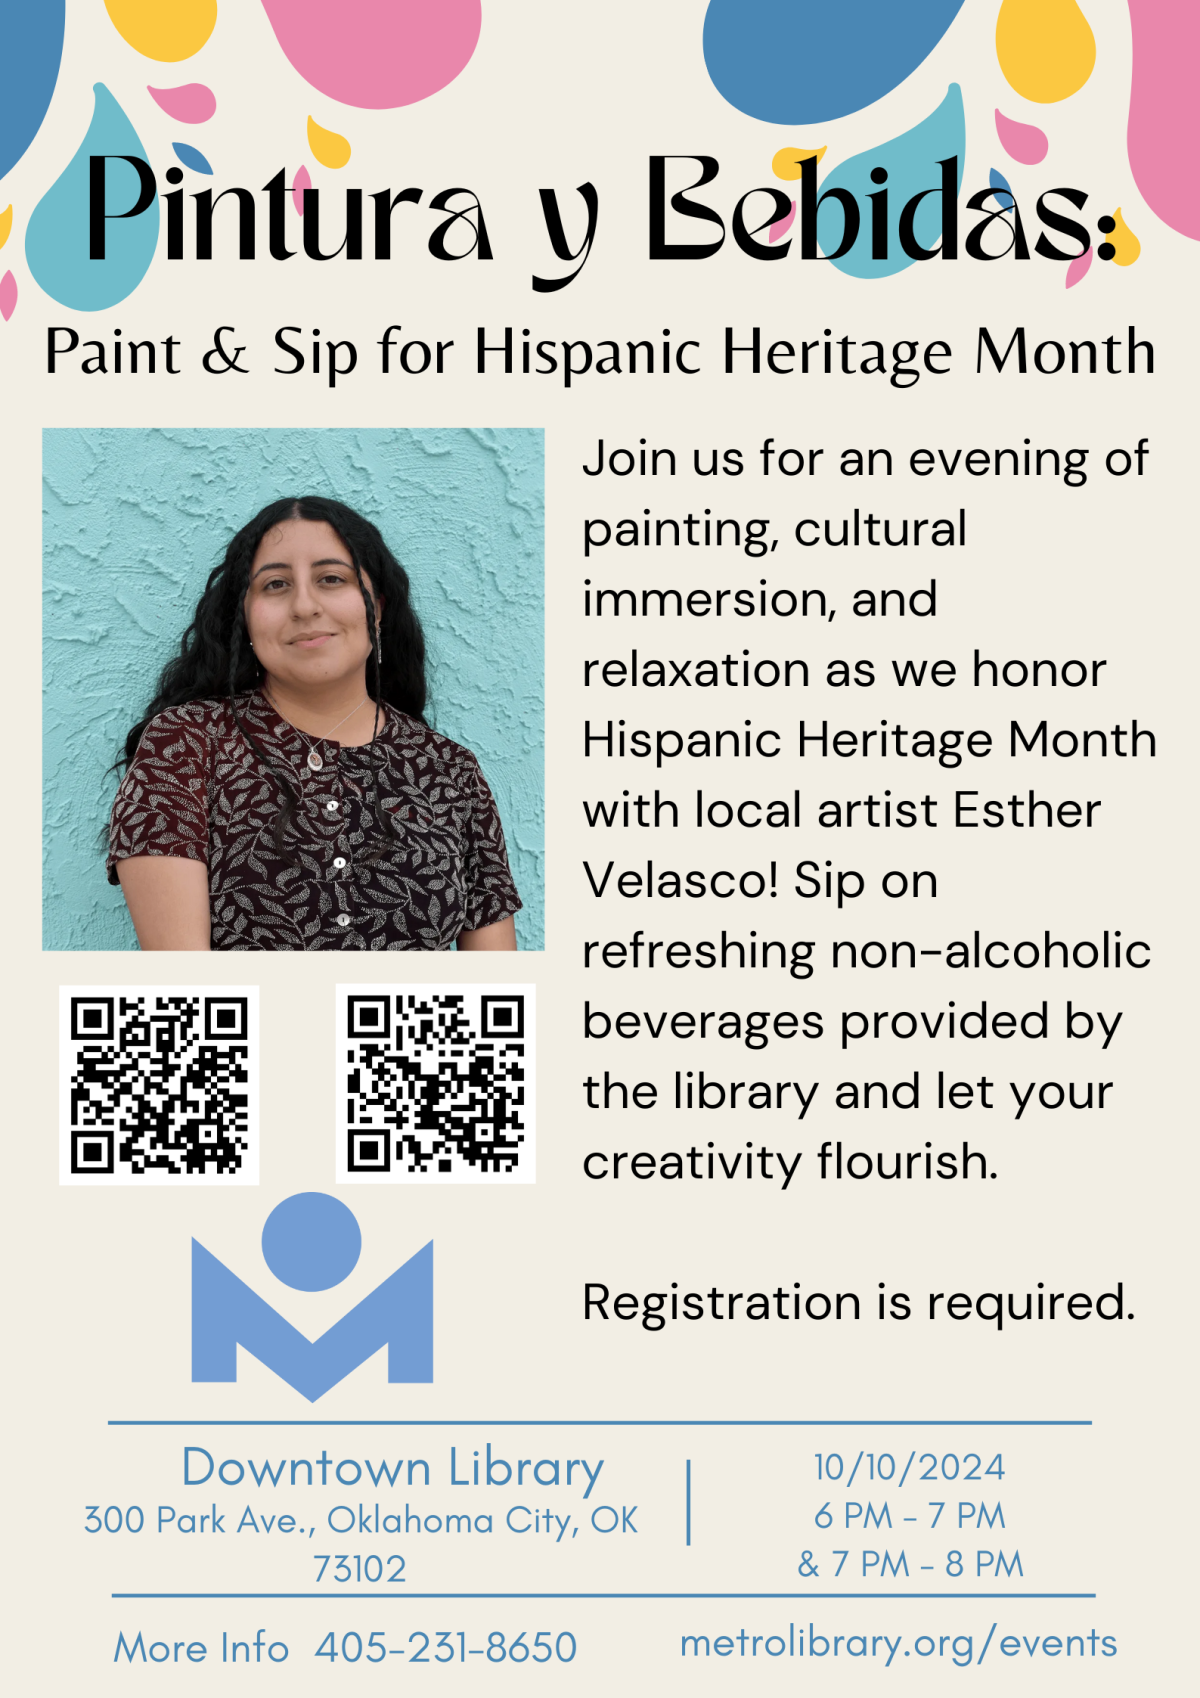 Pintura y Bebidas: Paint and Sip for Hispanic Heritage Month. Join us on October 10th at the Downtown Library for an evening of painting, cultural immersion, and relaxation as we honor Hispanic Heritage Month with local artist Esther Velasco! Sip on refreshing non-alcoholic beverages provided by the library and let your creativity flourish. There will be two sessions. One session will be from 6:00pm-7:00pm, and the other session will be from 7:00pm-8:00pm.